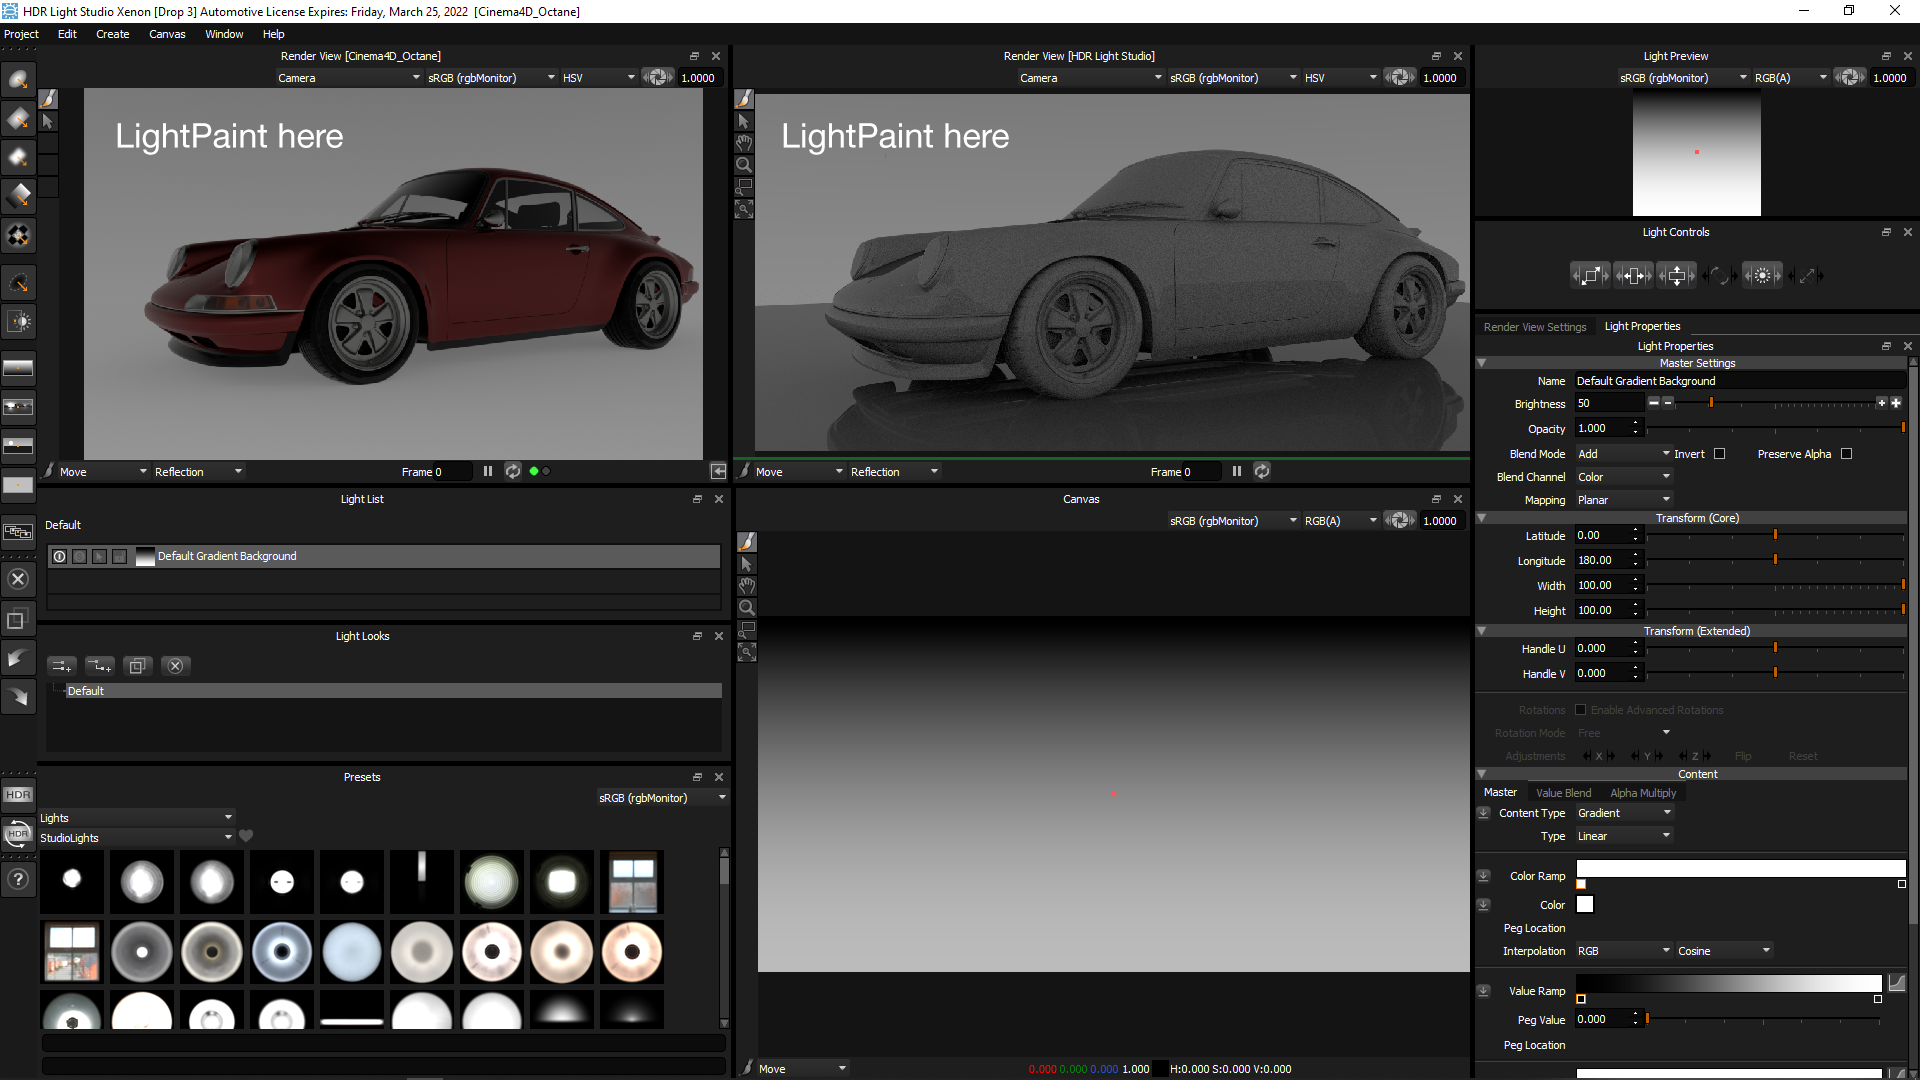 HDR Light Studio only (Cinema 4D is running and covered by HDR Light Studio)